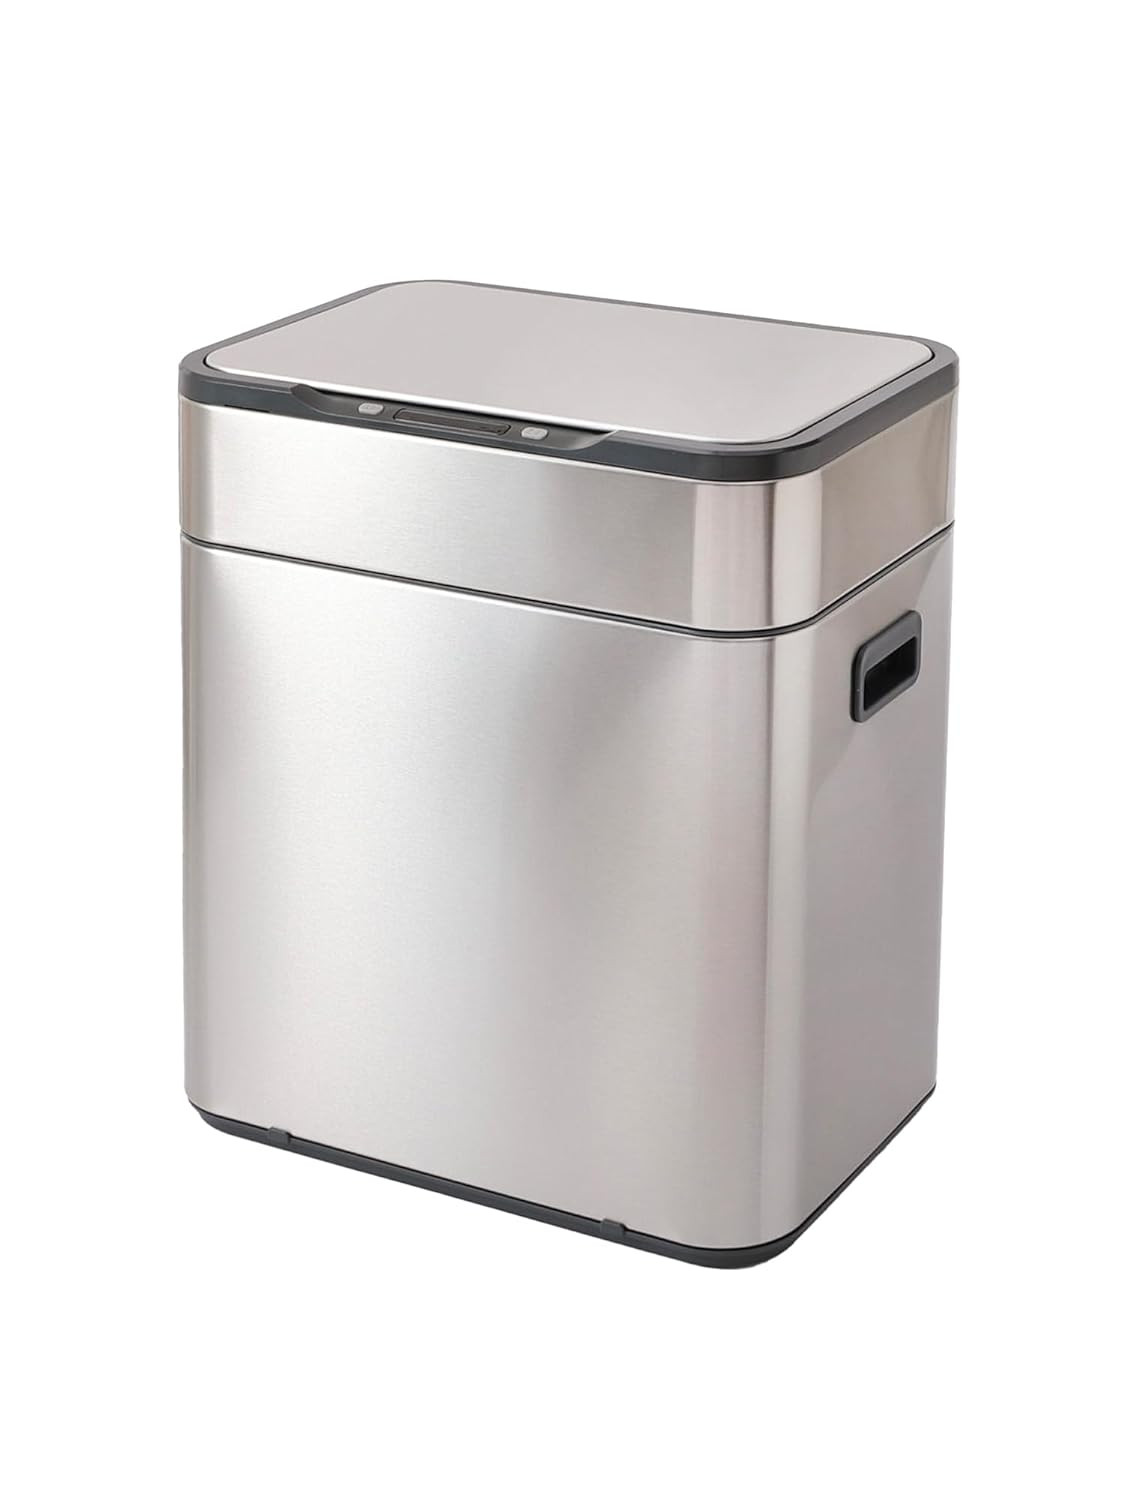 Kuber Industries Sensor Dustbin | Dual Compartment Sensor Dustbin | Touchless Trash Can | Smart Dustbin for Bedroom-Office-Living Room | 2 Removable Bucket Can | YW-5513 | 13 LTR | Silver